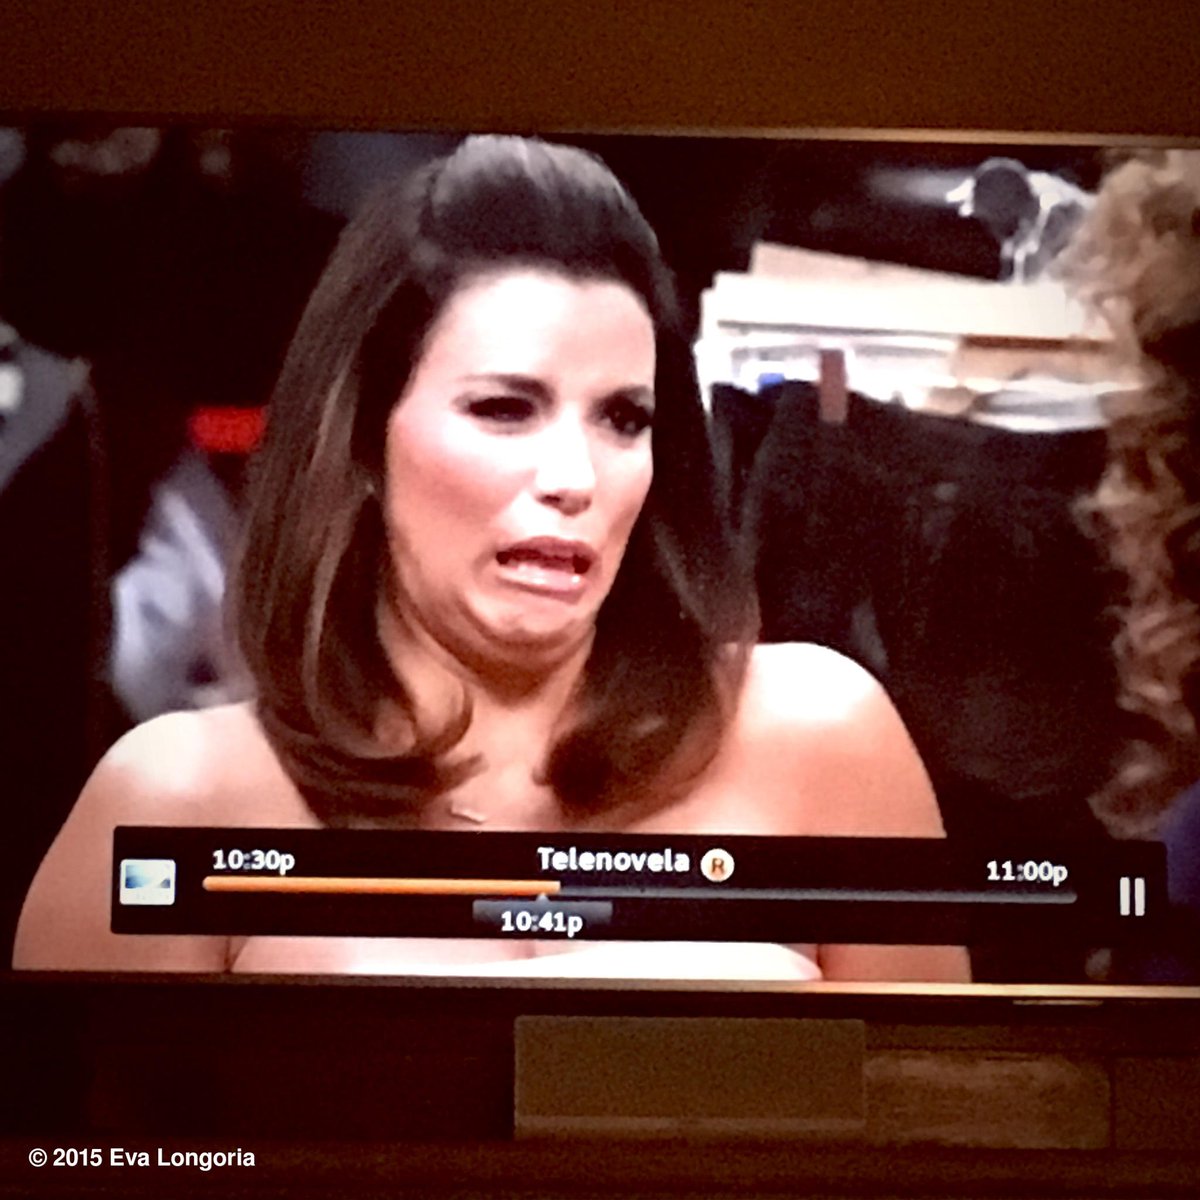 How sexy is this face I'm making! #Telenovela #GaggingFaces #OhHiDoubleChin https://t.co/HE4MR6wUPA